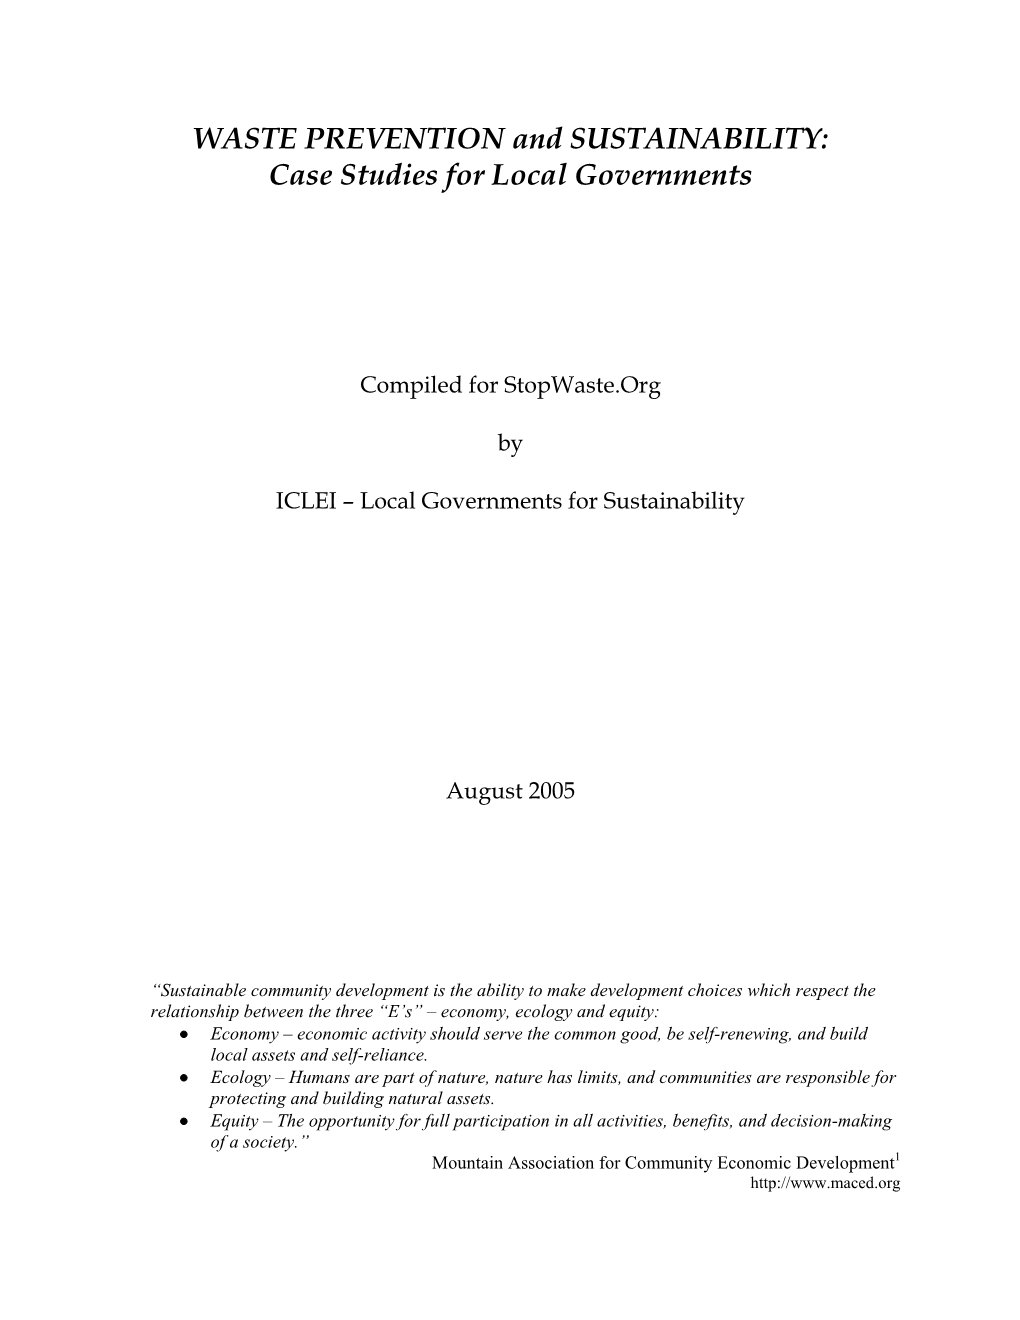 WASTE PREVENTION and SUSTAINABILITY: Case Studies for Local Governments